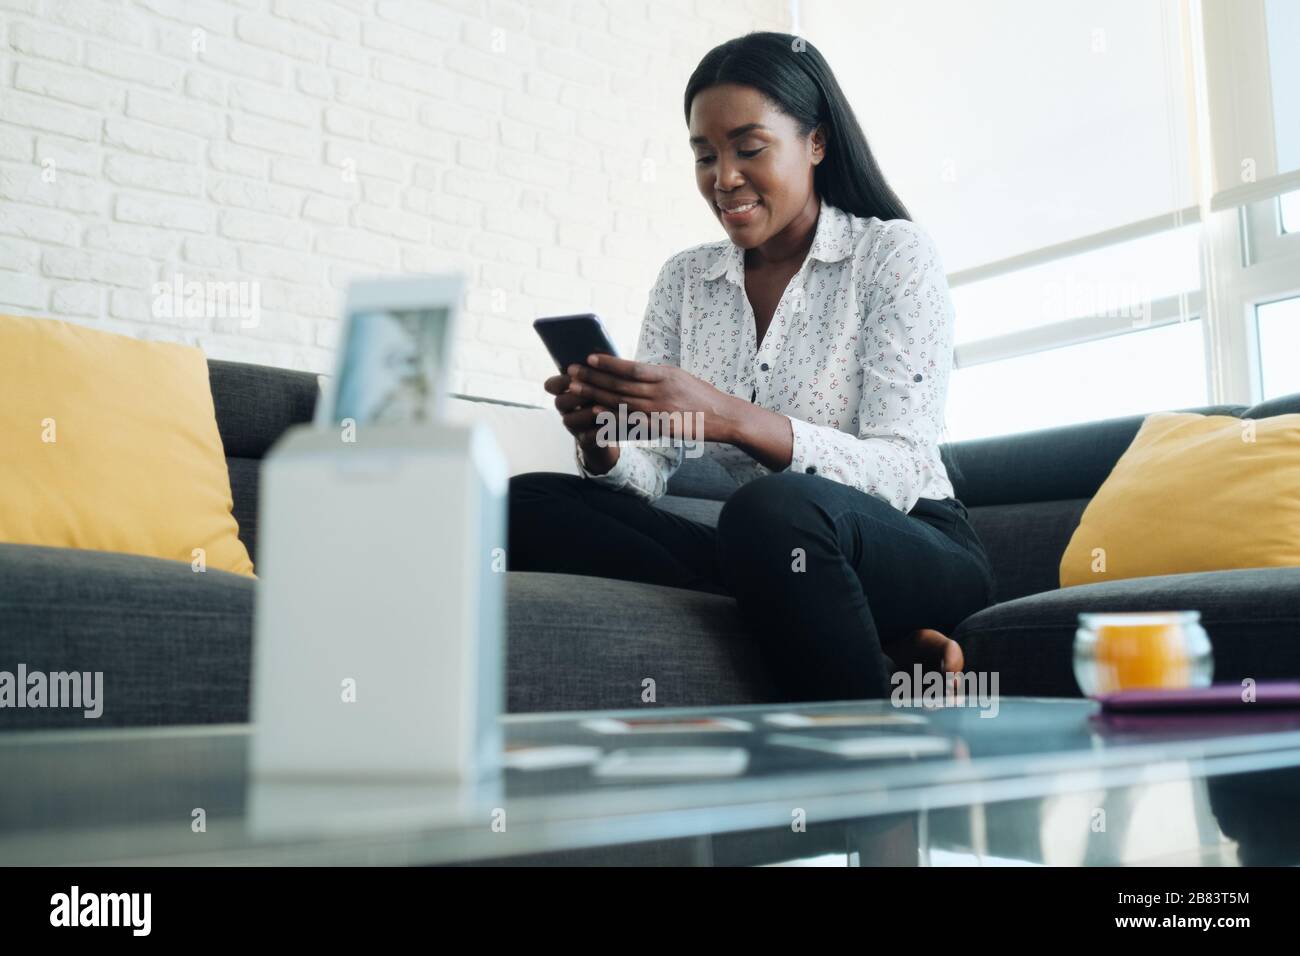 Black Woman Using Portable Wi-Fi Printer For Printing Pictures Stock Photo